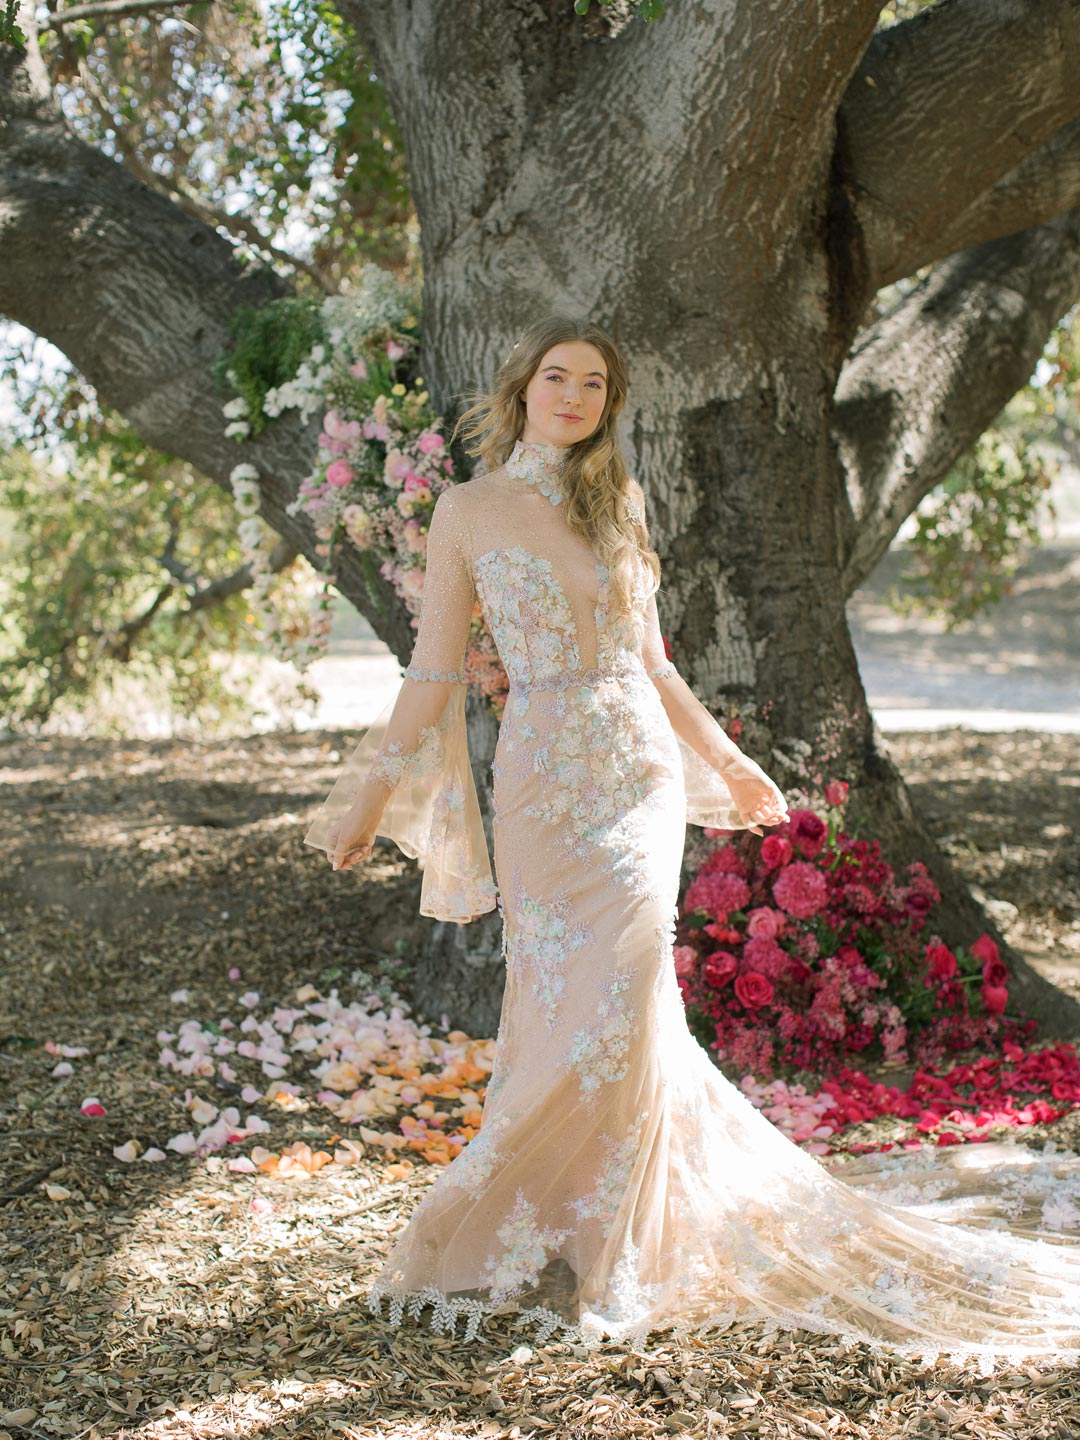 Venus Couture Wedding Dress with Color Long Sleeves designed by Claire Pettibone